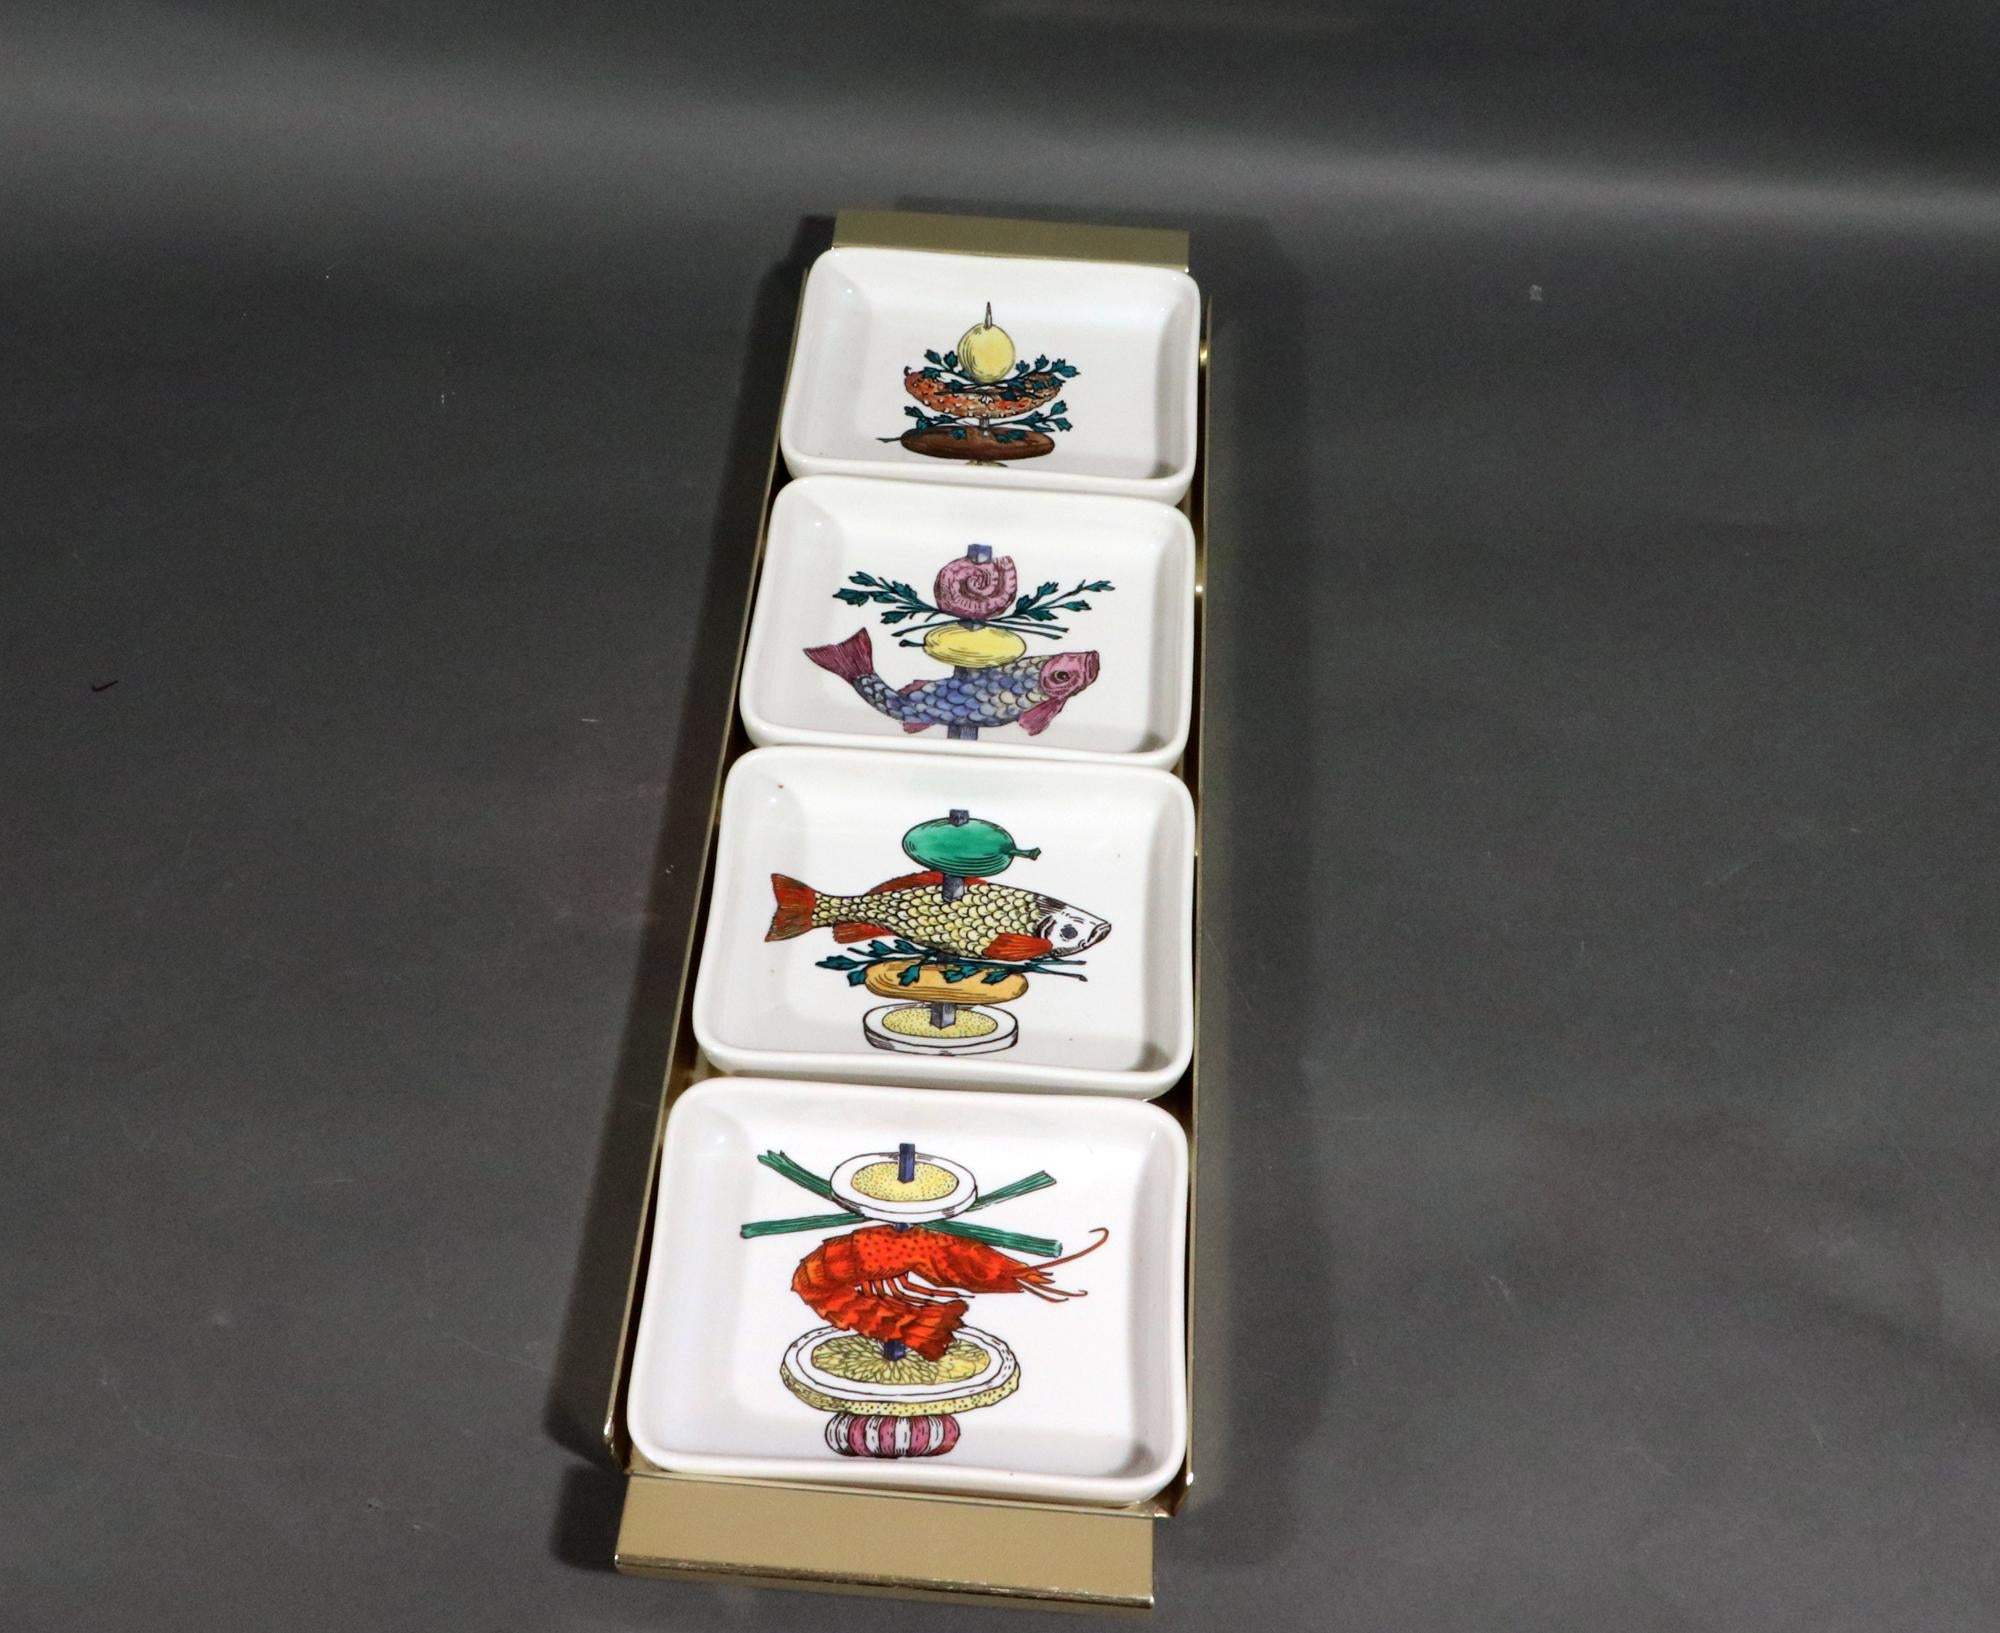 Italian Mid-century Modern Piero Fornasetti Ceramic Appetizer Fish Kebab Dishes and Tray For Sale